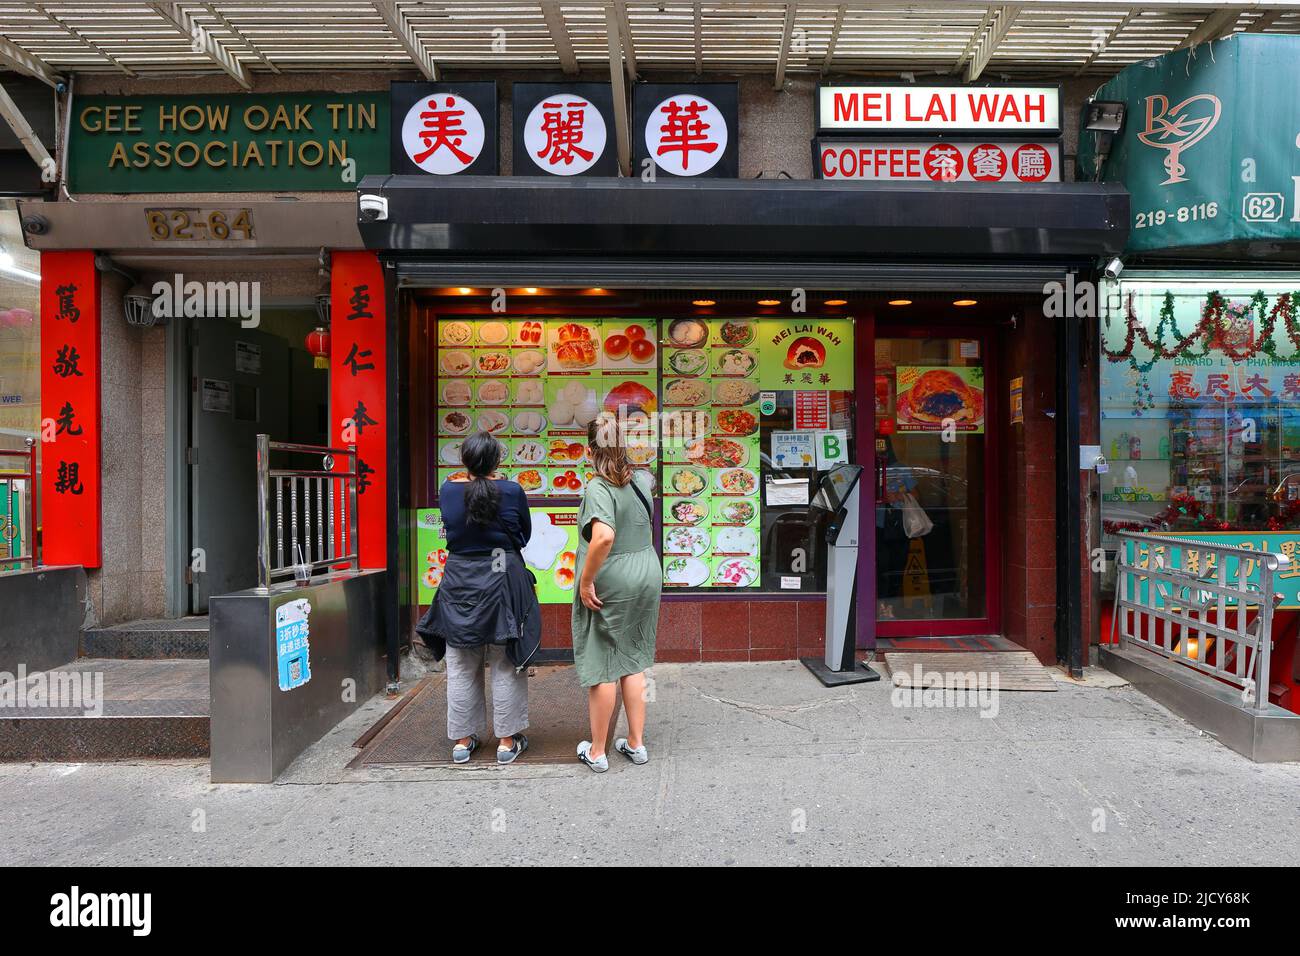 Mei Lai Wah 美麗華, 64 Bayard St, New York, NYC storefront photo of a Chinese bakery and coffee shop in Manhattan Chinatown. Stock Photo